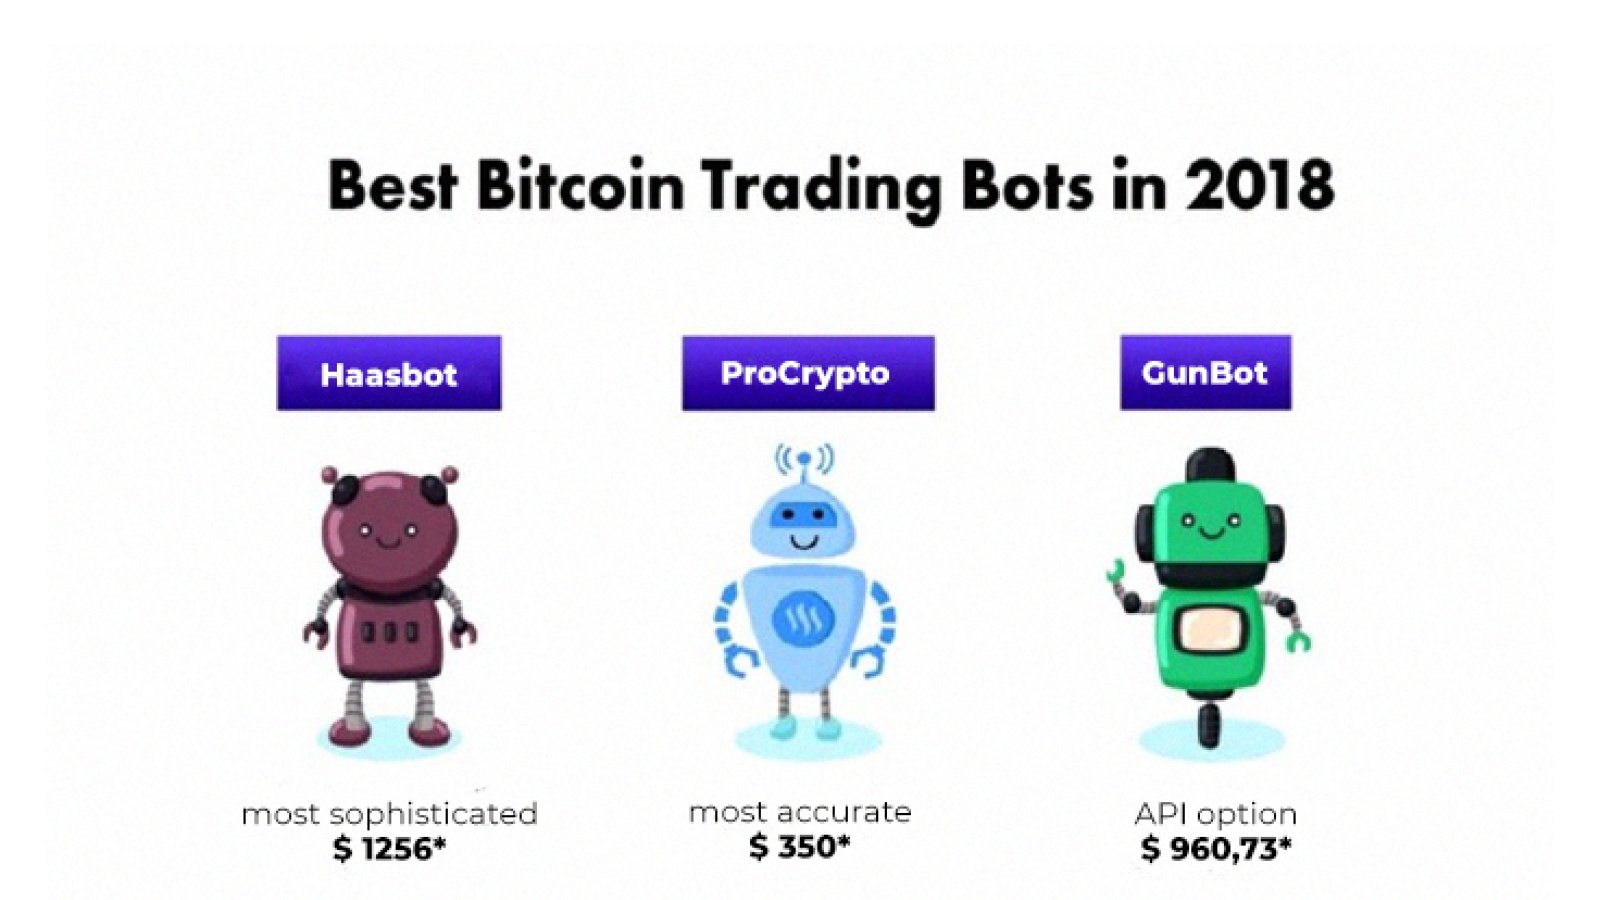 Best Bitcoin Trading Bots in 2018